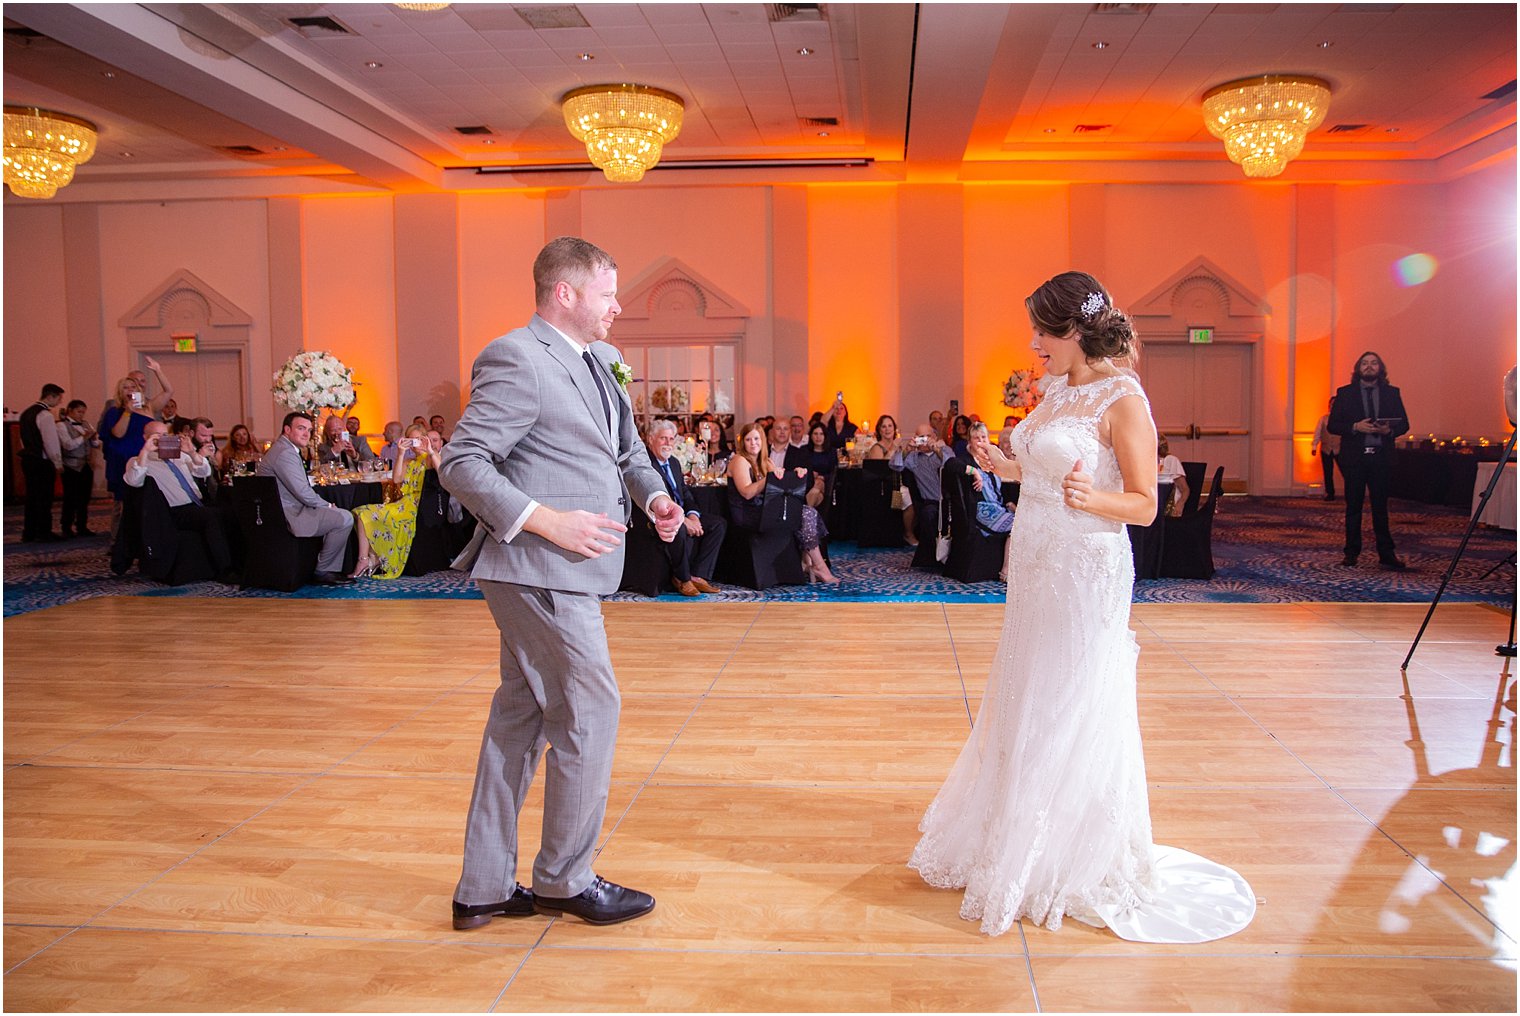 bride dancing with groom during wedding reception at Ocean Place Resort and Spa